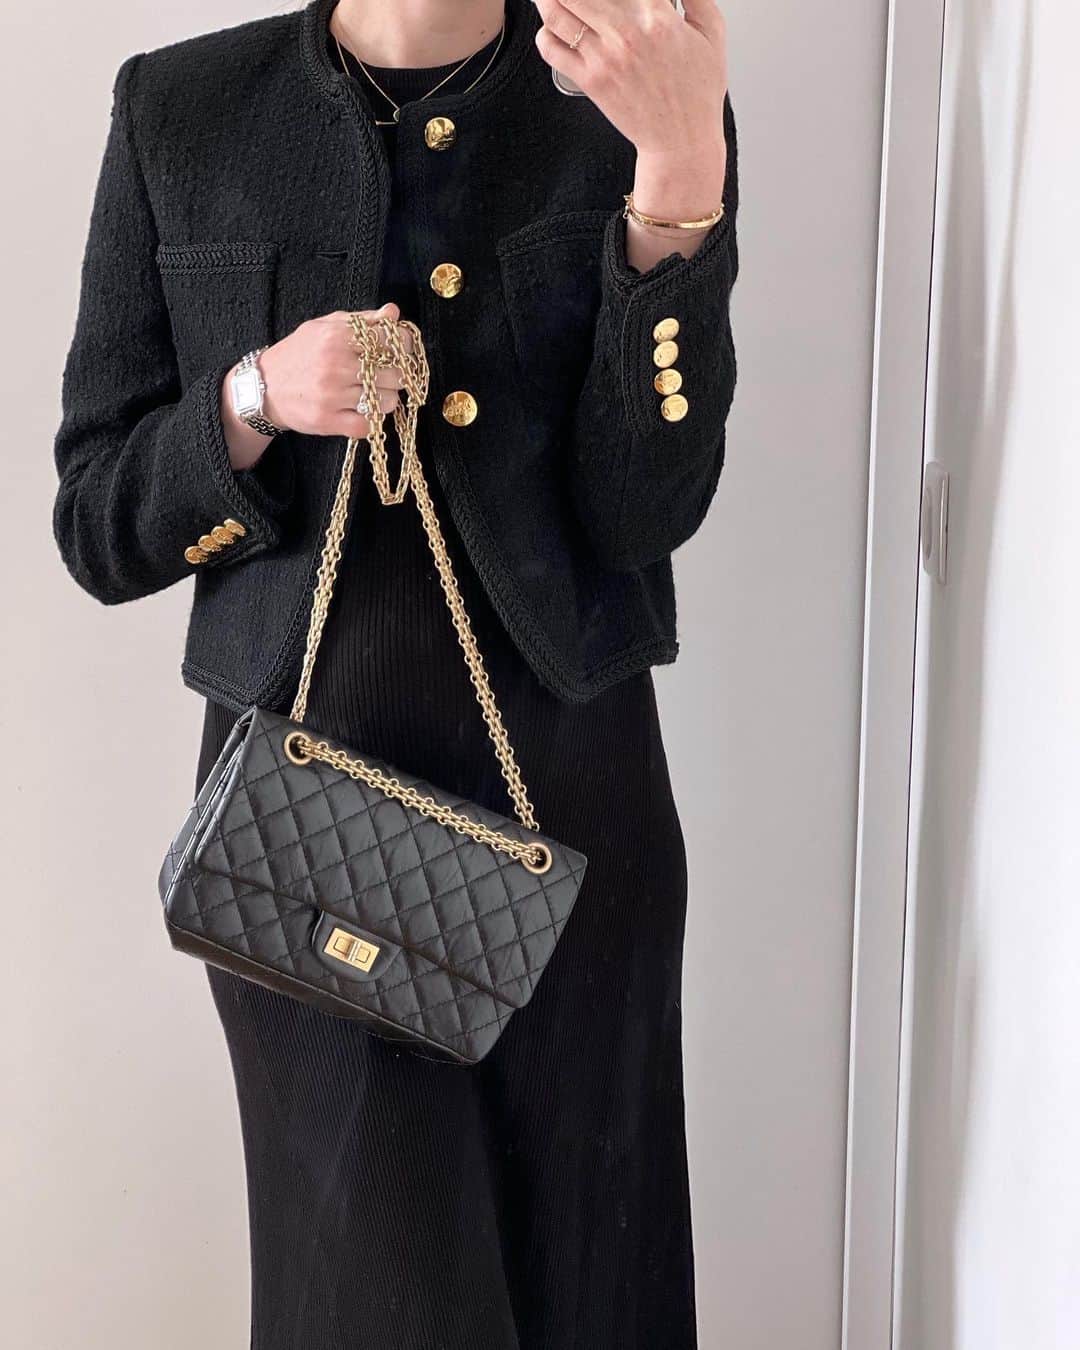 Chanel 2.55 black with gold chain